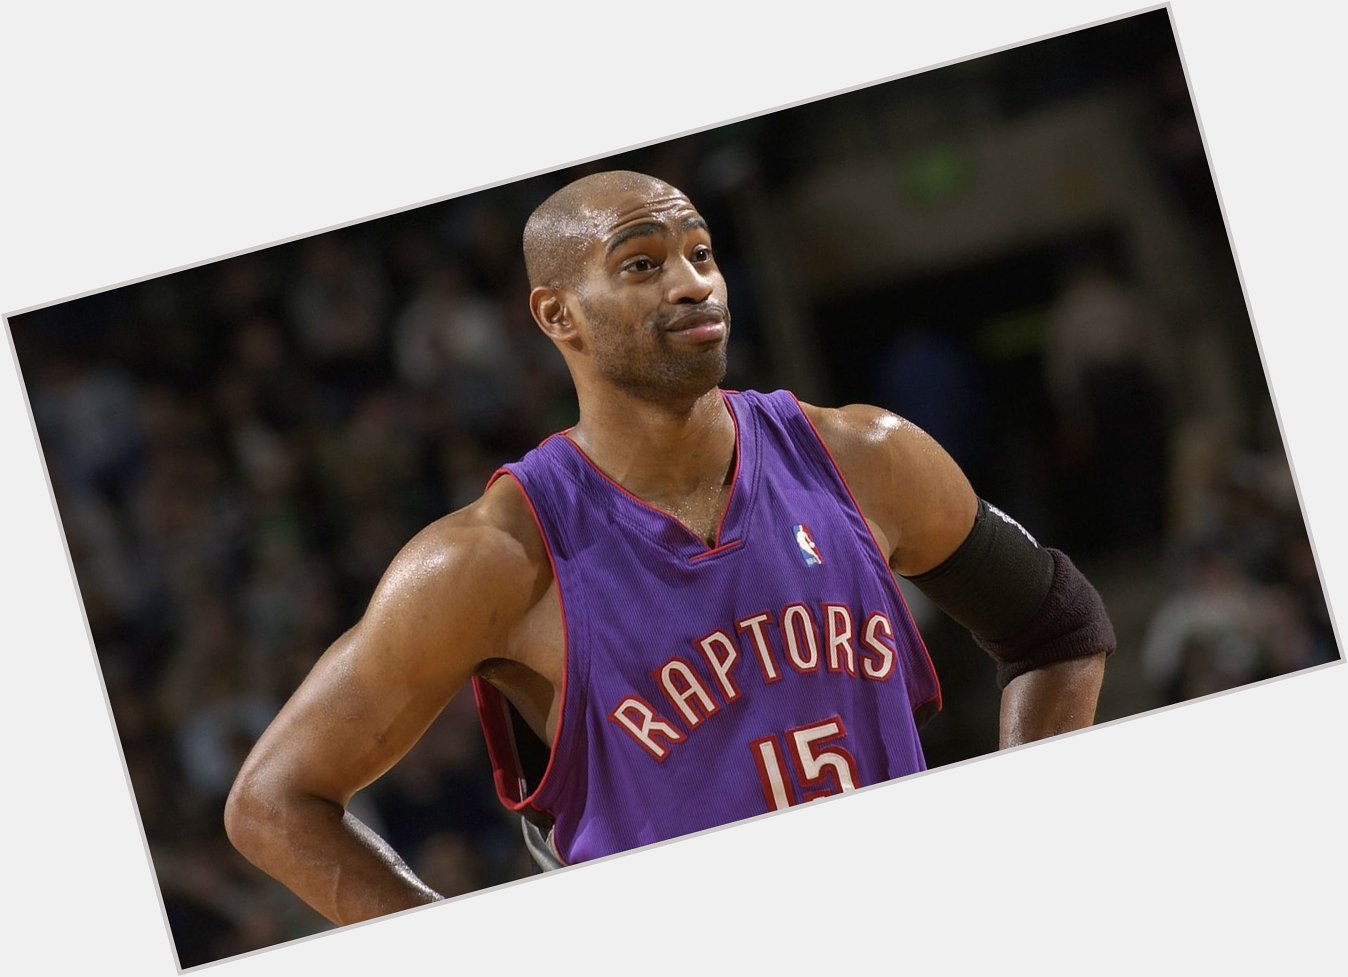 Another heavy hitter was born on January 26. Happy Belated Birthday to Vince Carter! 